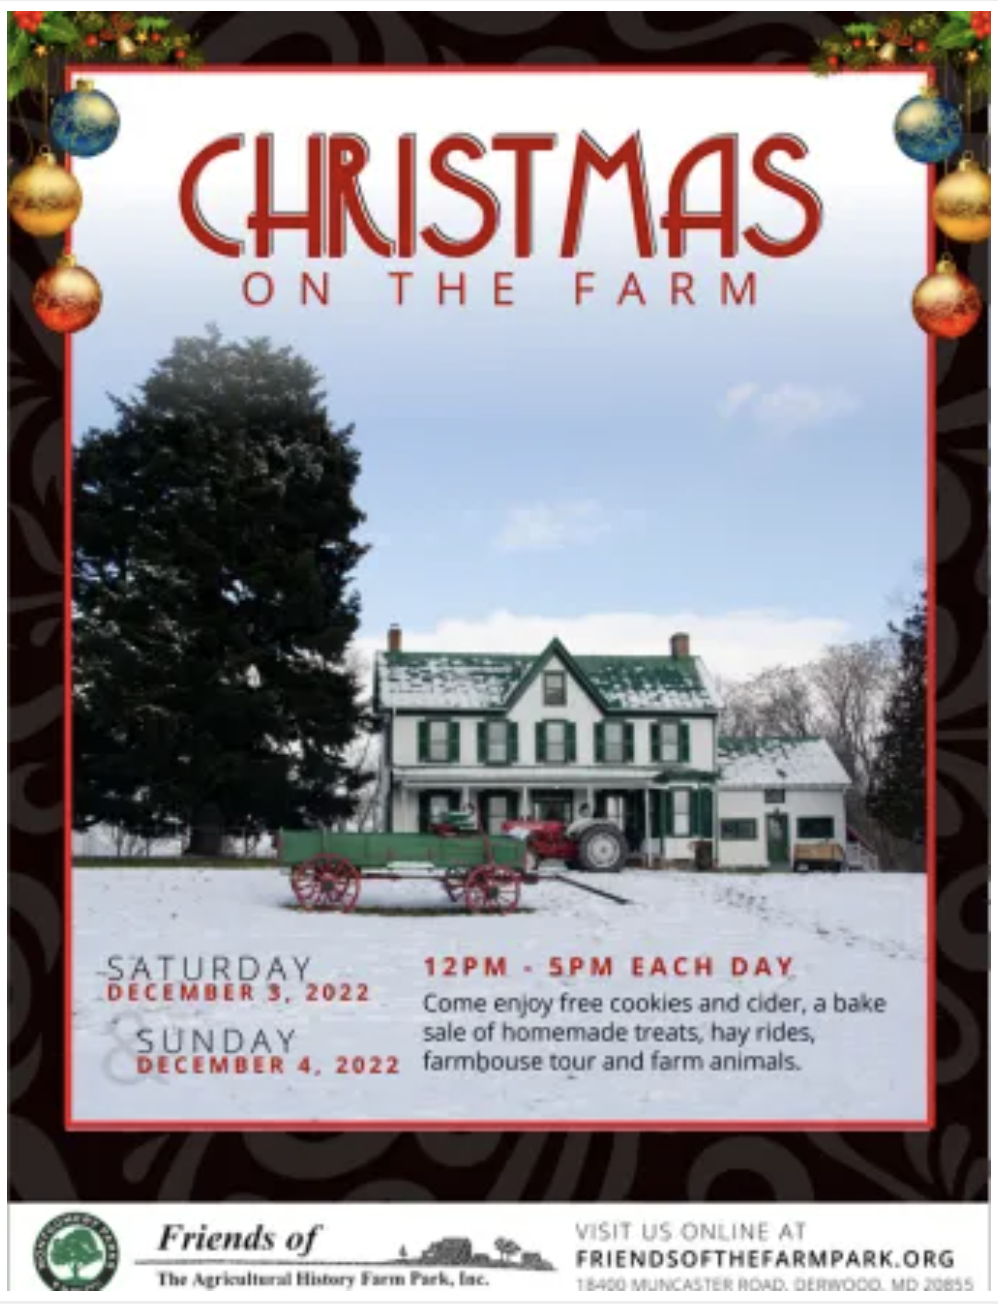 ‘Christmas on the Farm’ Will Be Hosted Dec. 3-4 at Montgomery Agricultural History Farm Park in Derwood 